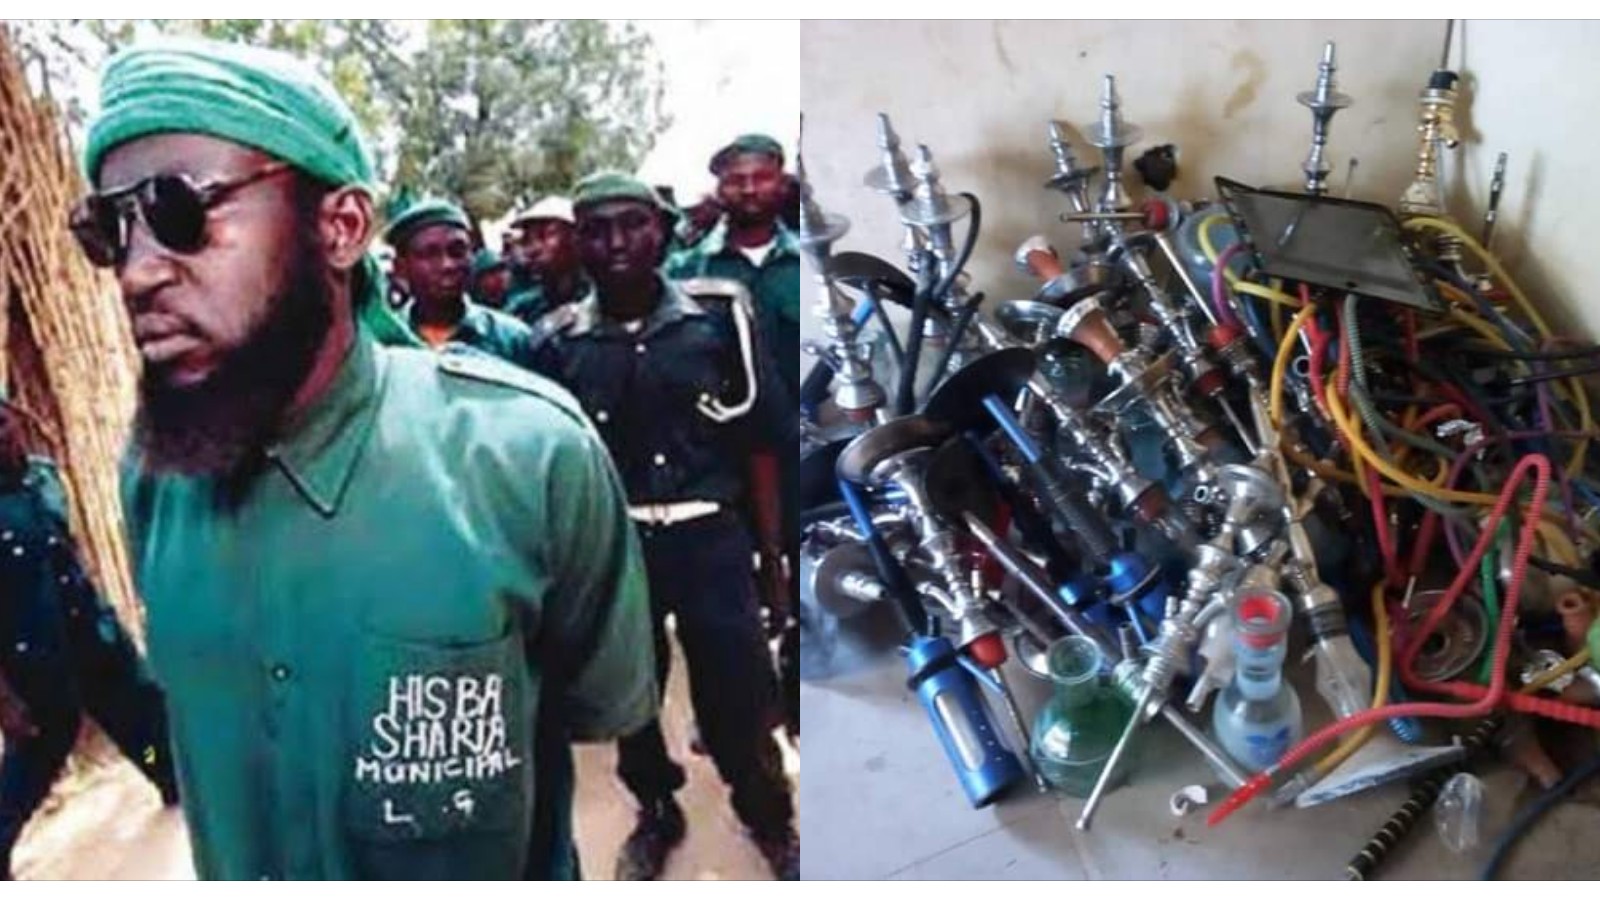 25 youths arrested as Kano Hisbah raids Shisha joints, seizes over 100 pipes